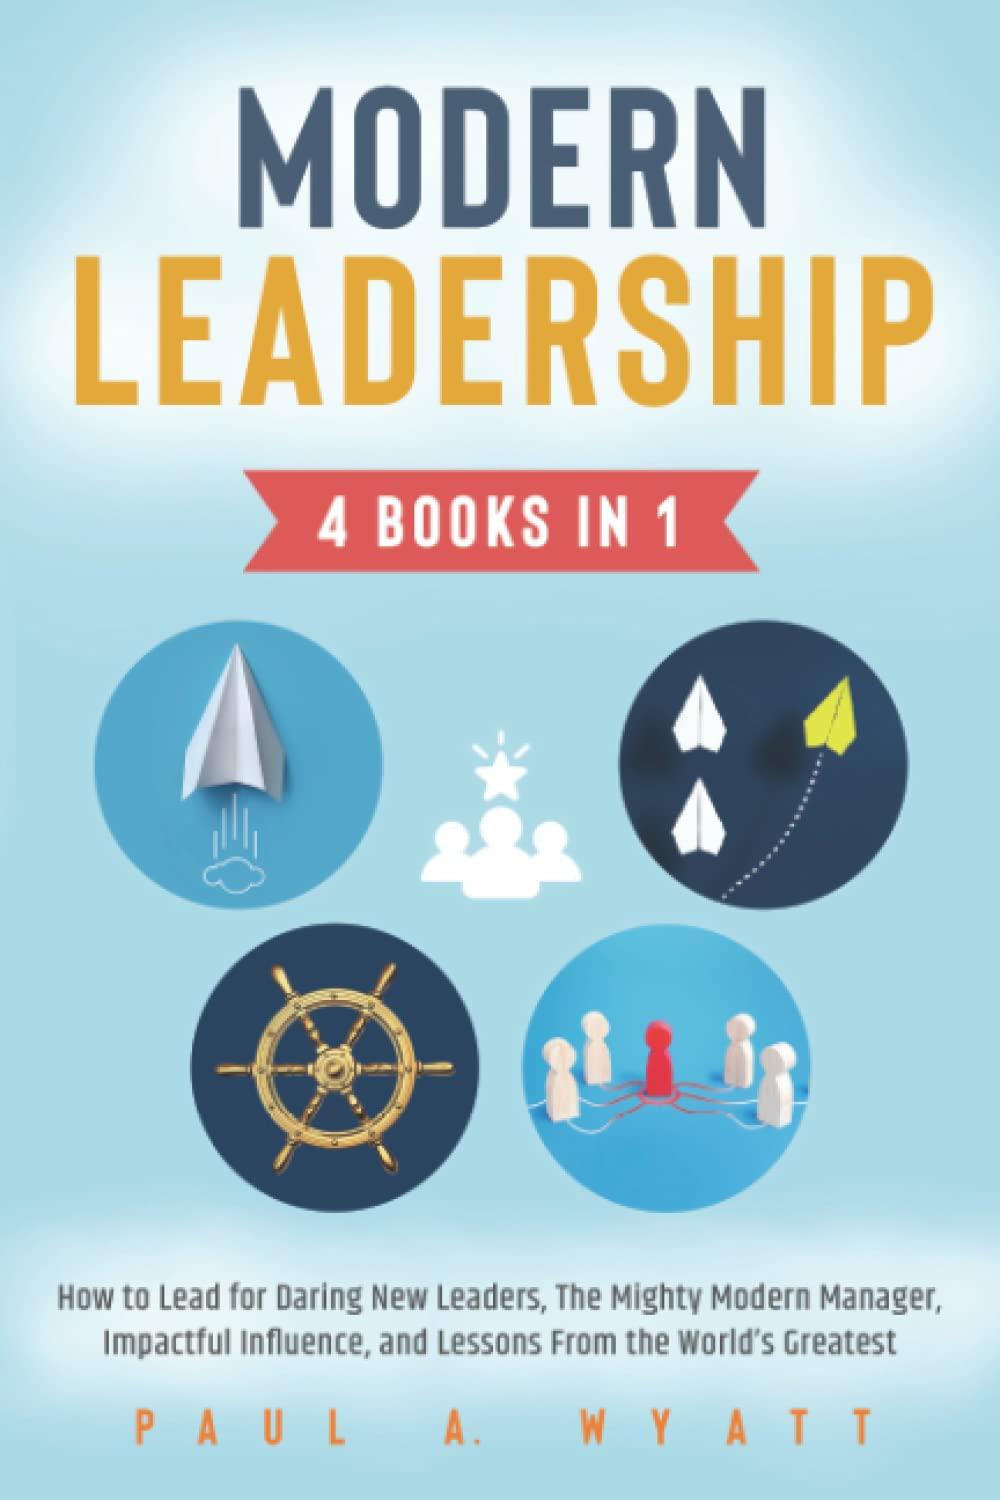 modern leadership 4 books in 1 how to lead for daring new leaders the mighty modern manager impactful